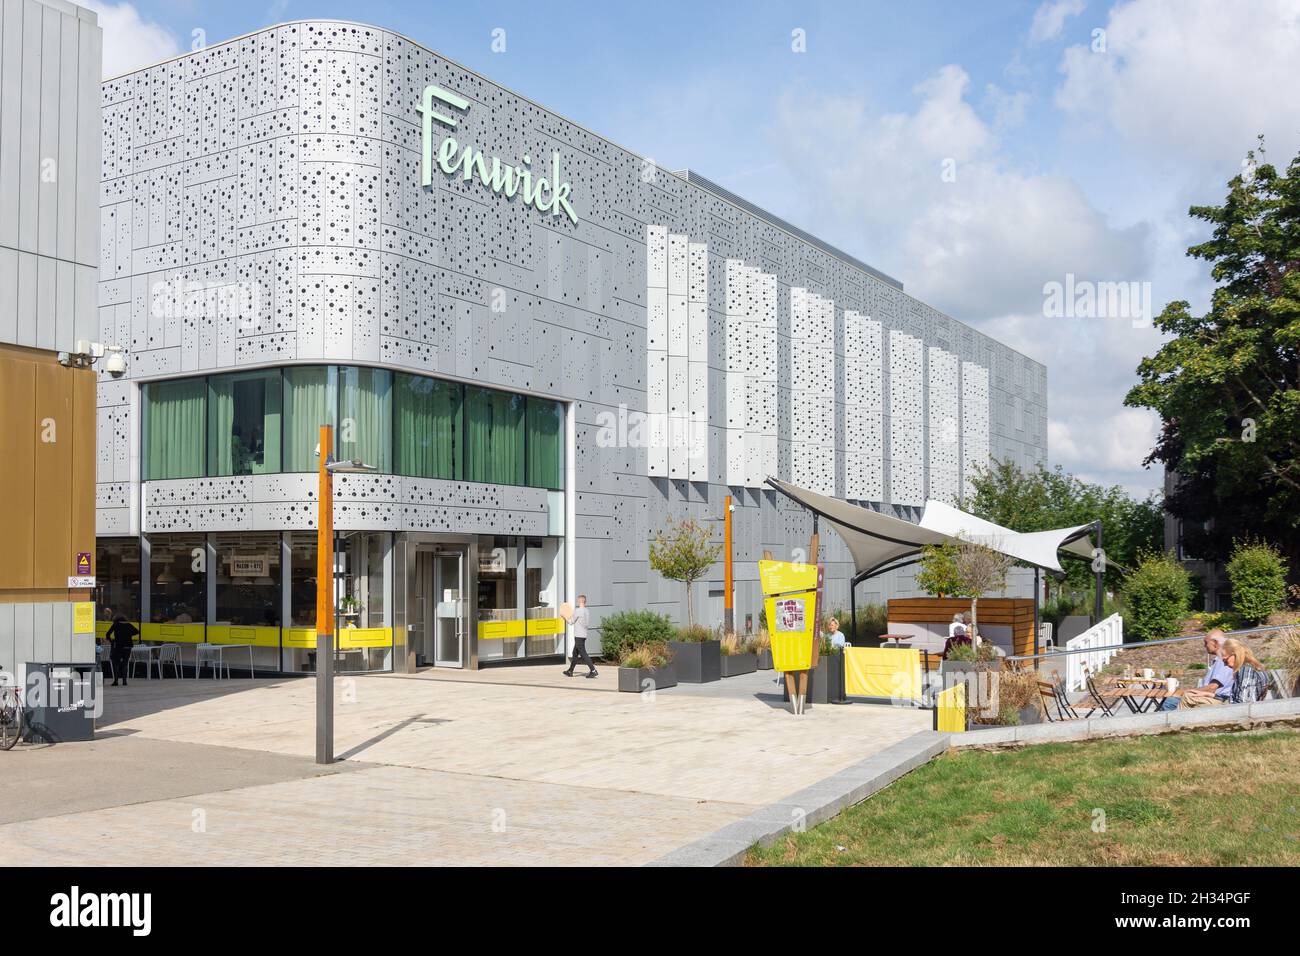 Fenwick department store and Fuego Restaurant, The Lexicon Shopping Centre, Bracknell, Berkshire, England, United Kingdom Stock Photo